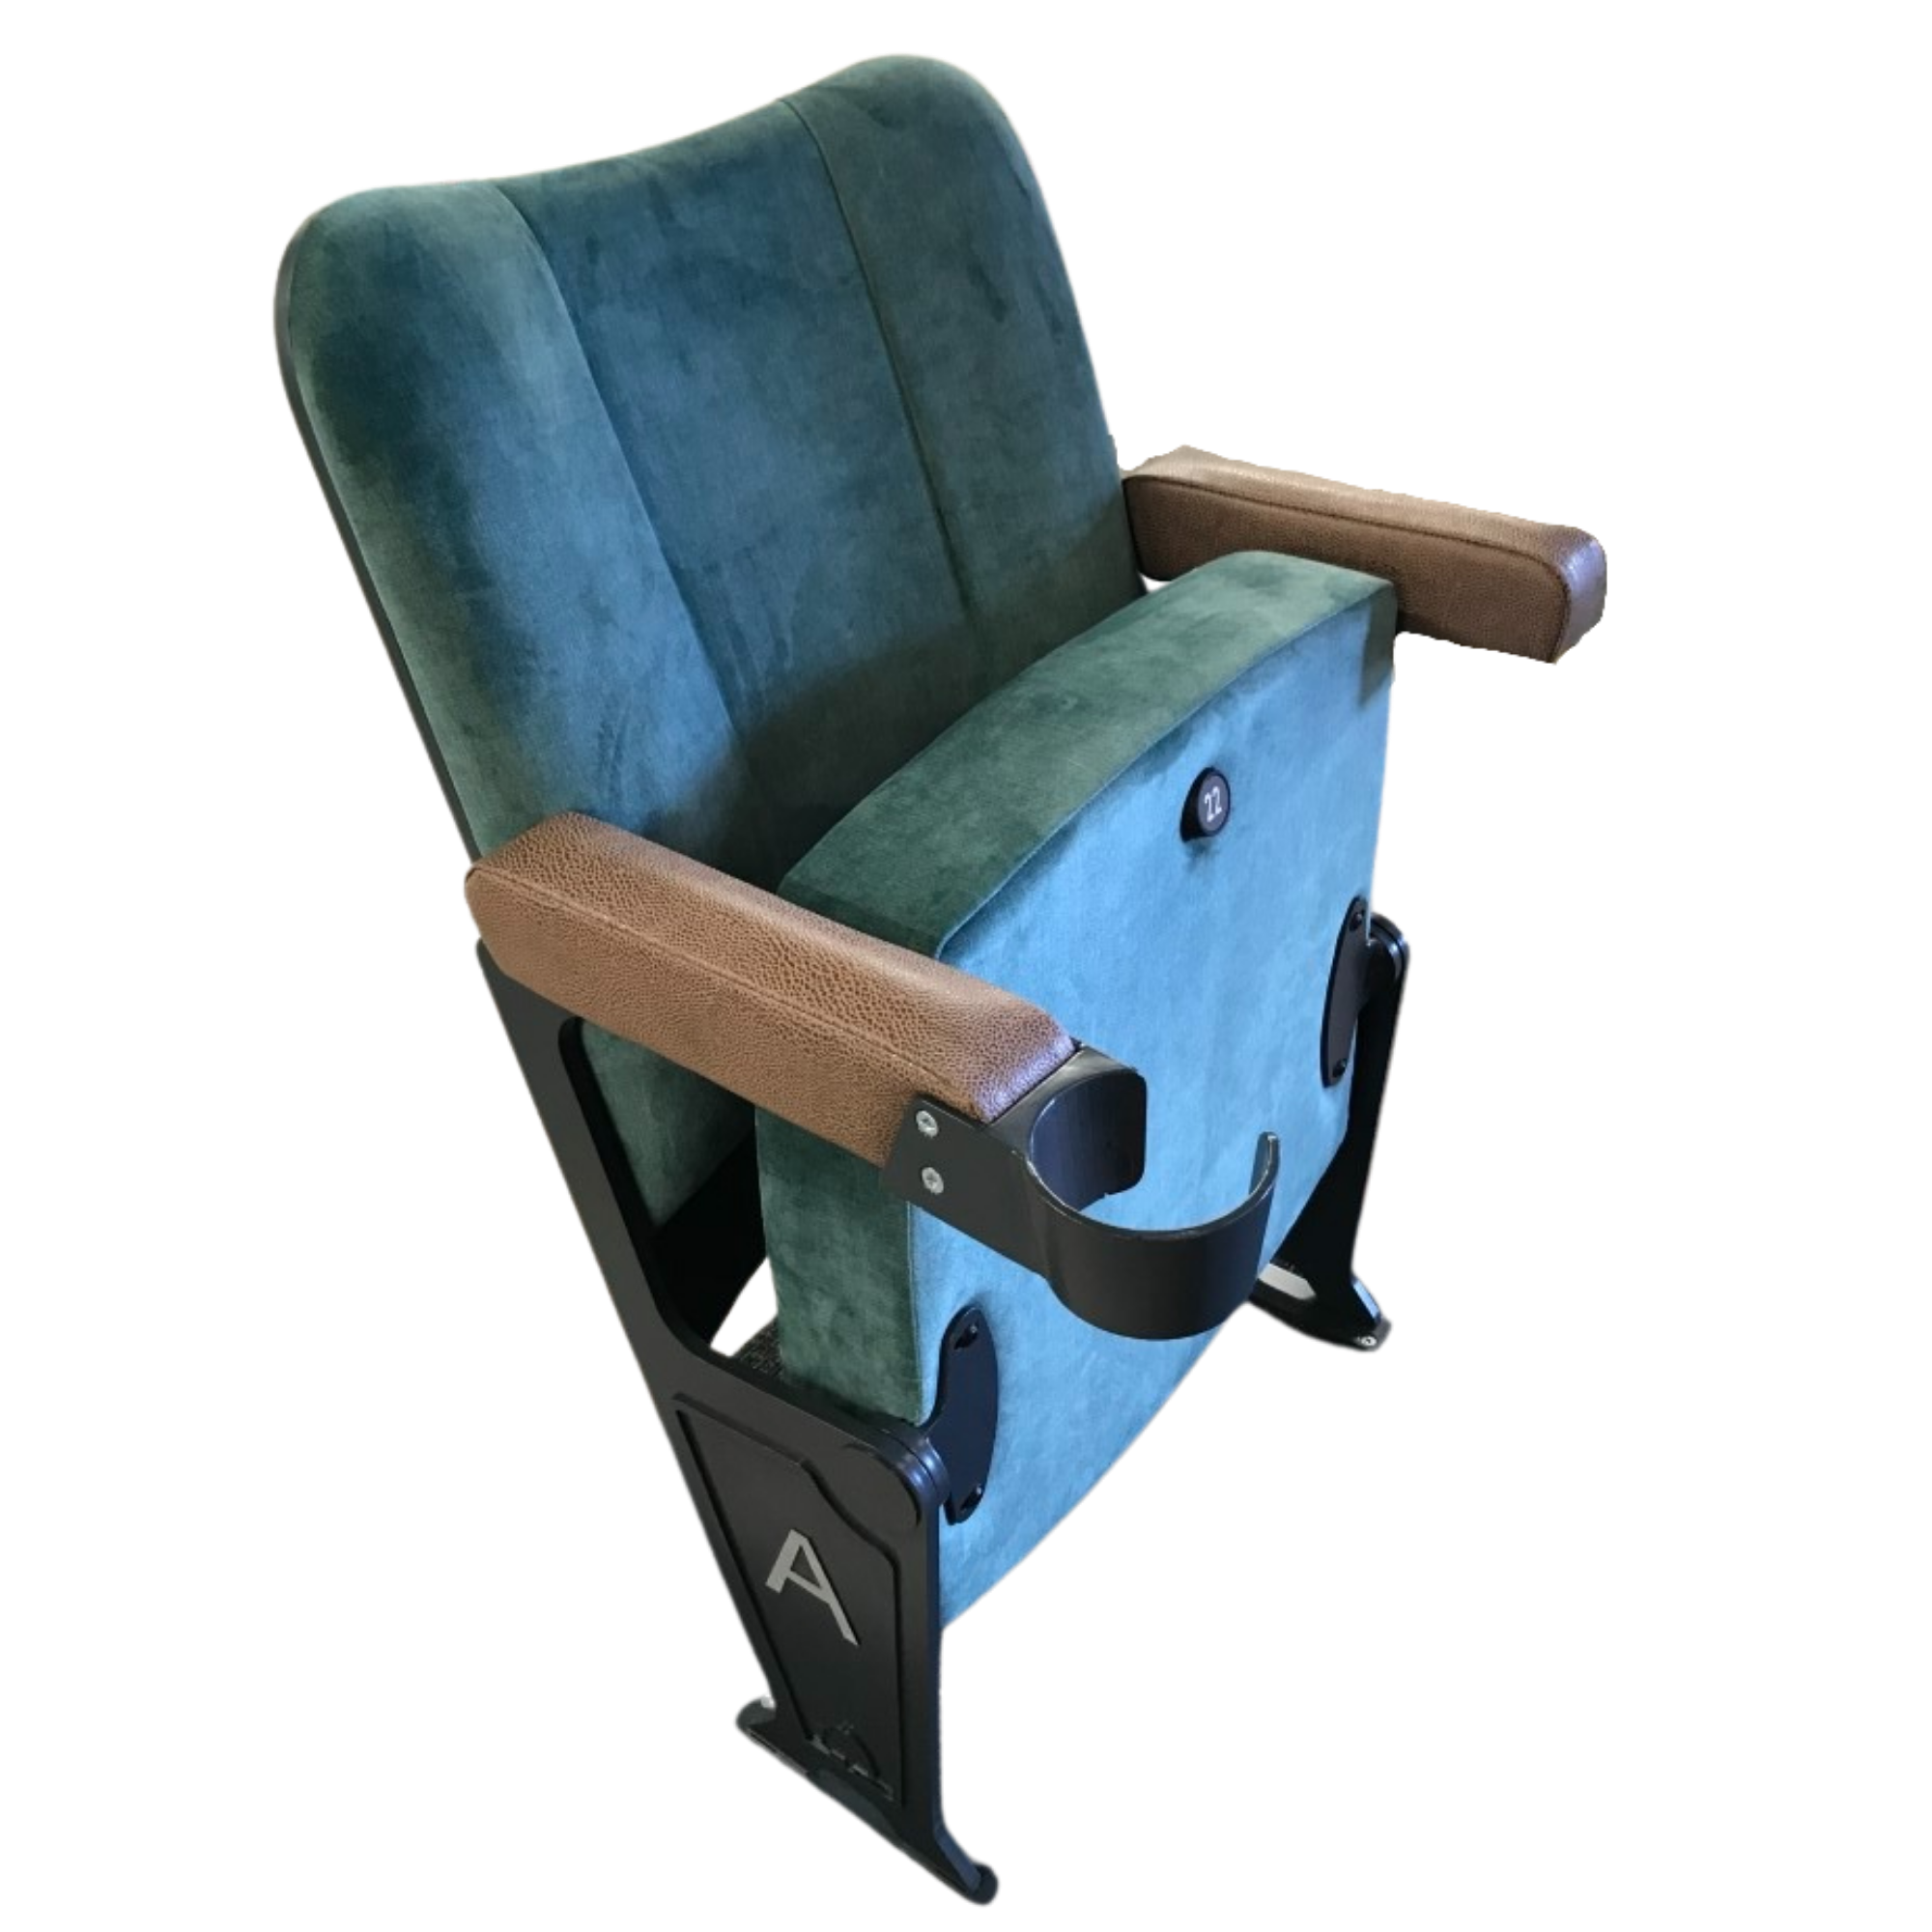 A blue velvet theater chair with a wooden armrest.